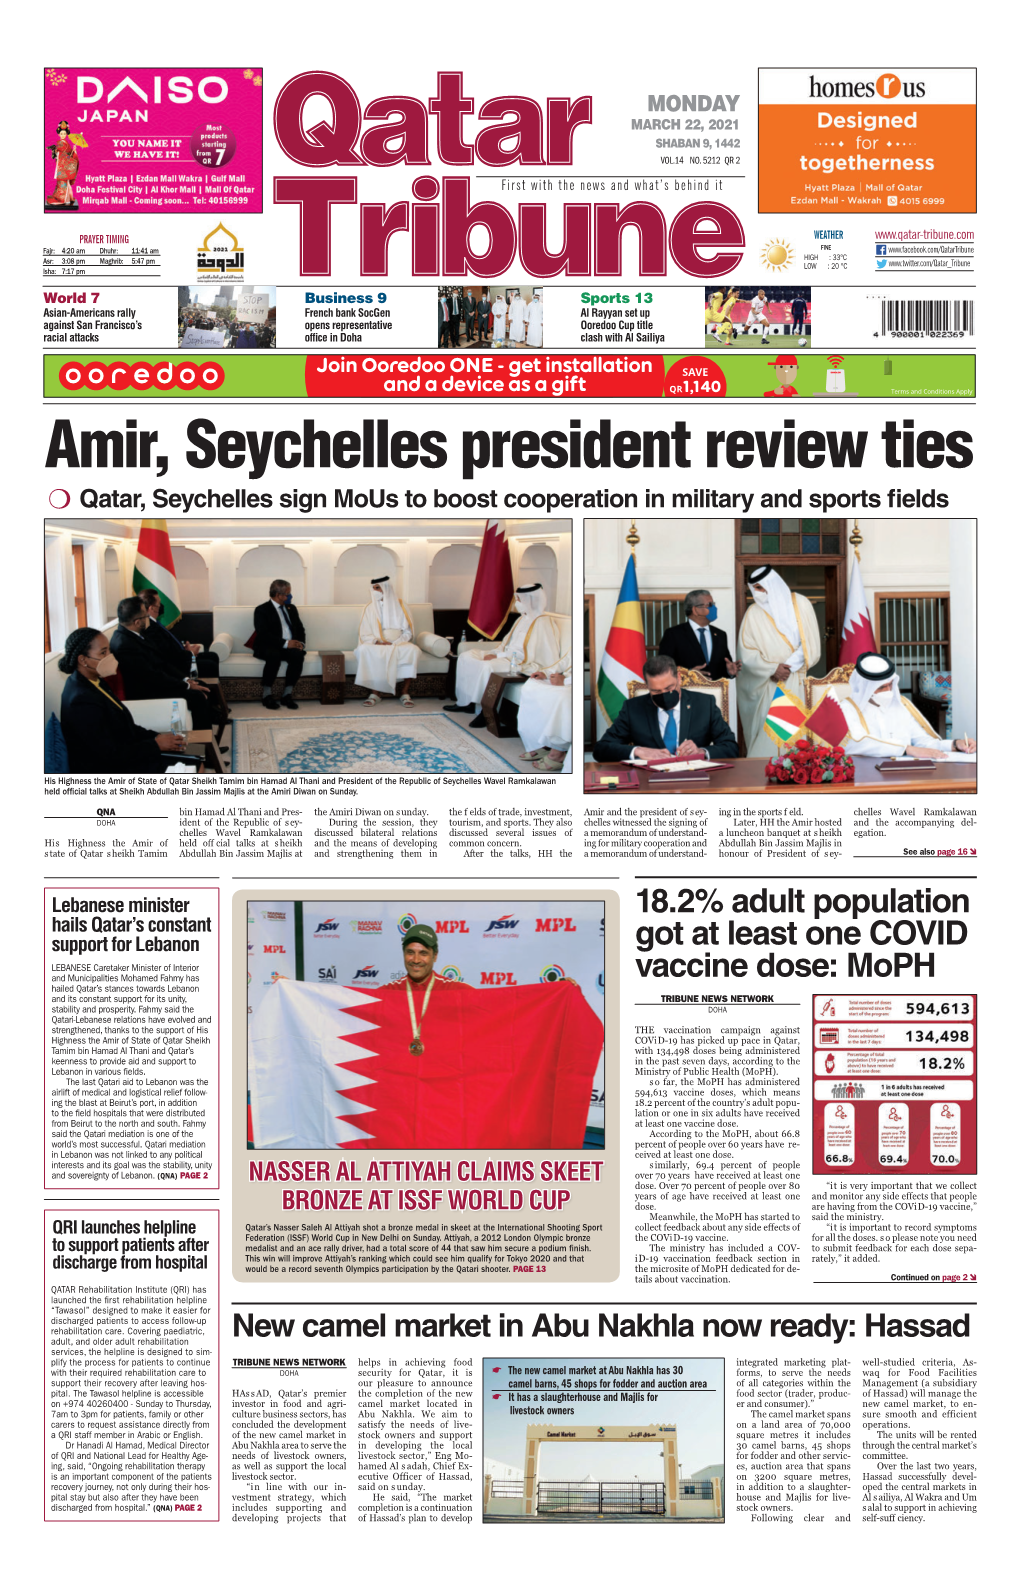 Amir, Seychelles President Review Ties Qatar, Seychelles Sign Mous to Boost Cooperation in Military and Sports Fields